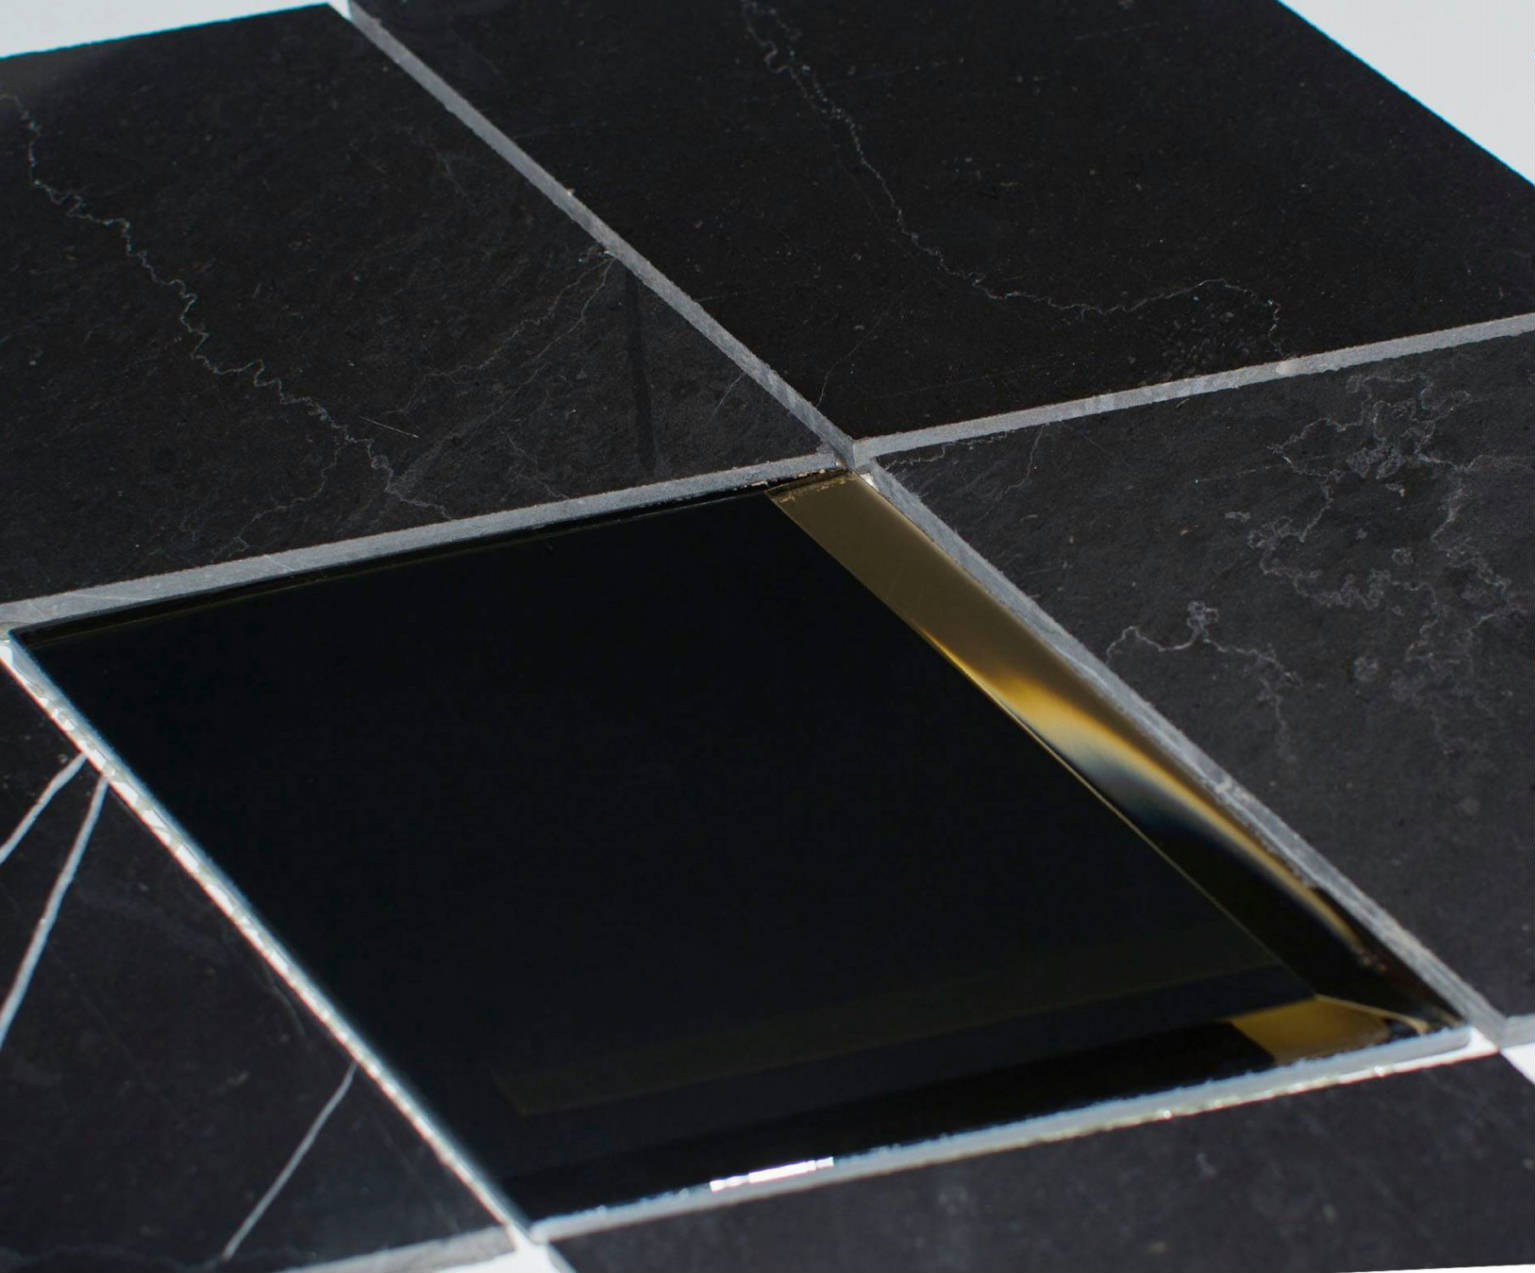 WA1015 | Stones And More | Finest selection of Mosaics, Glass, Tile and Stone